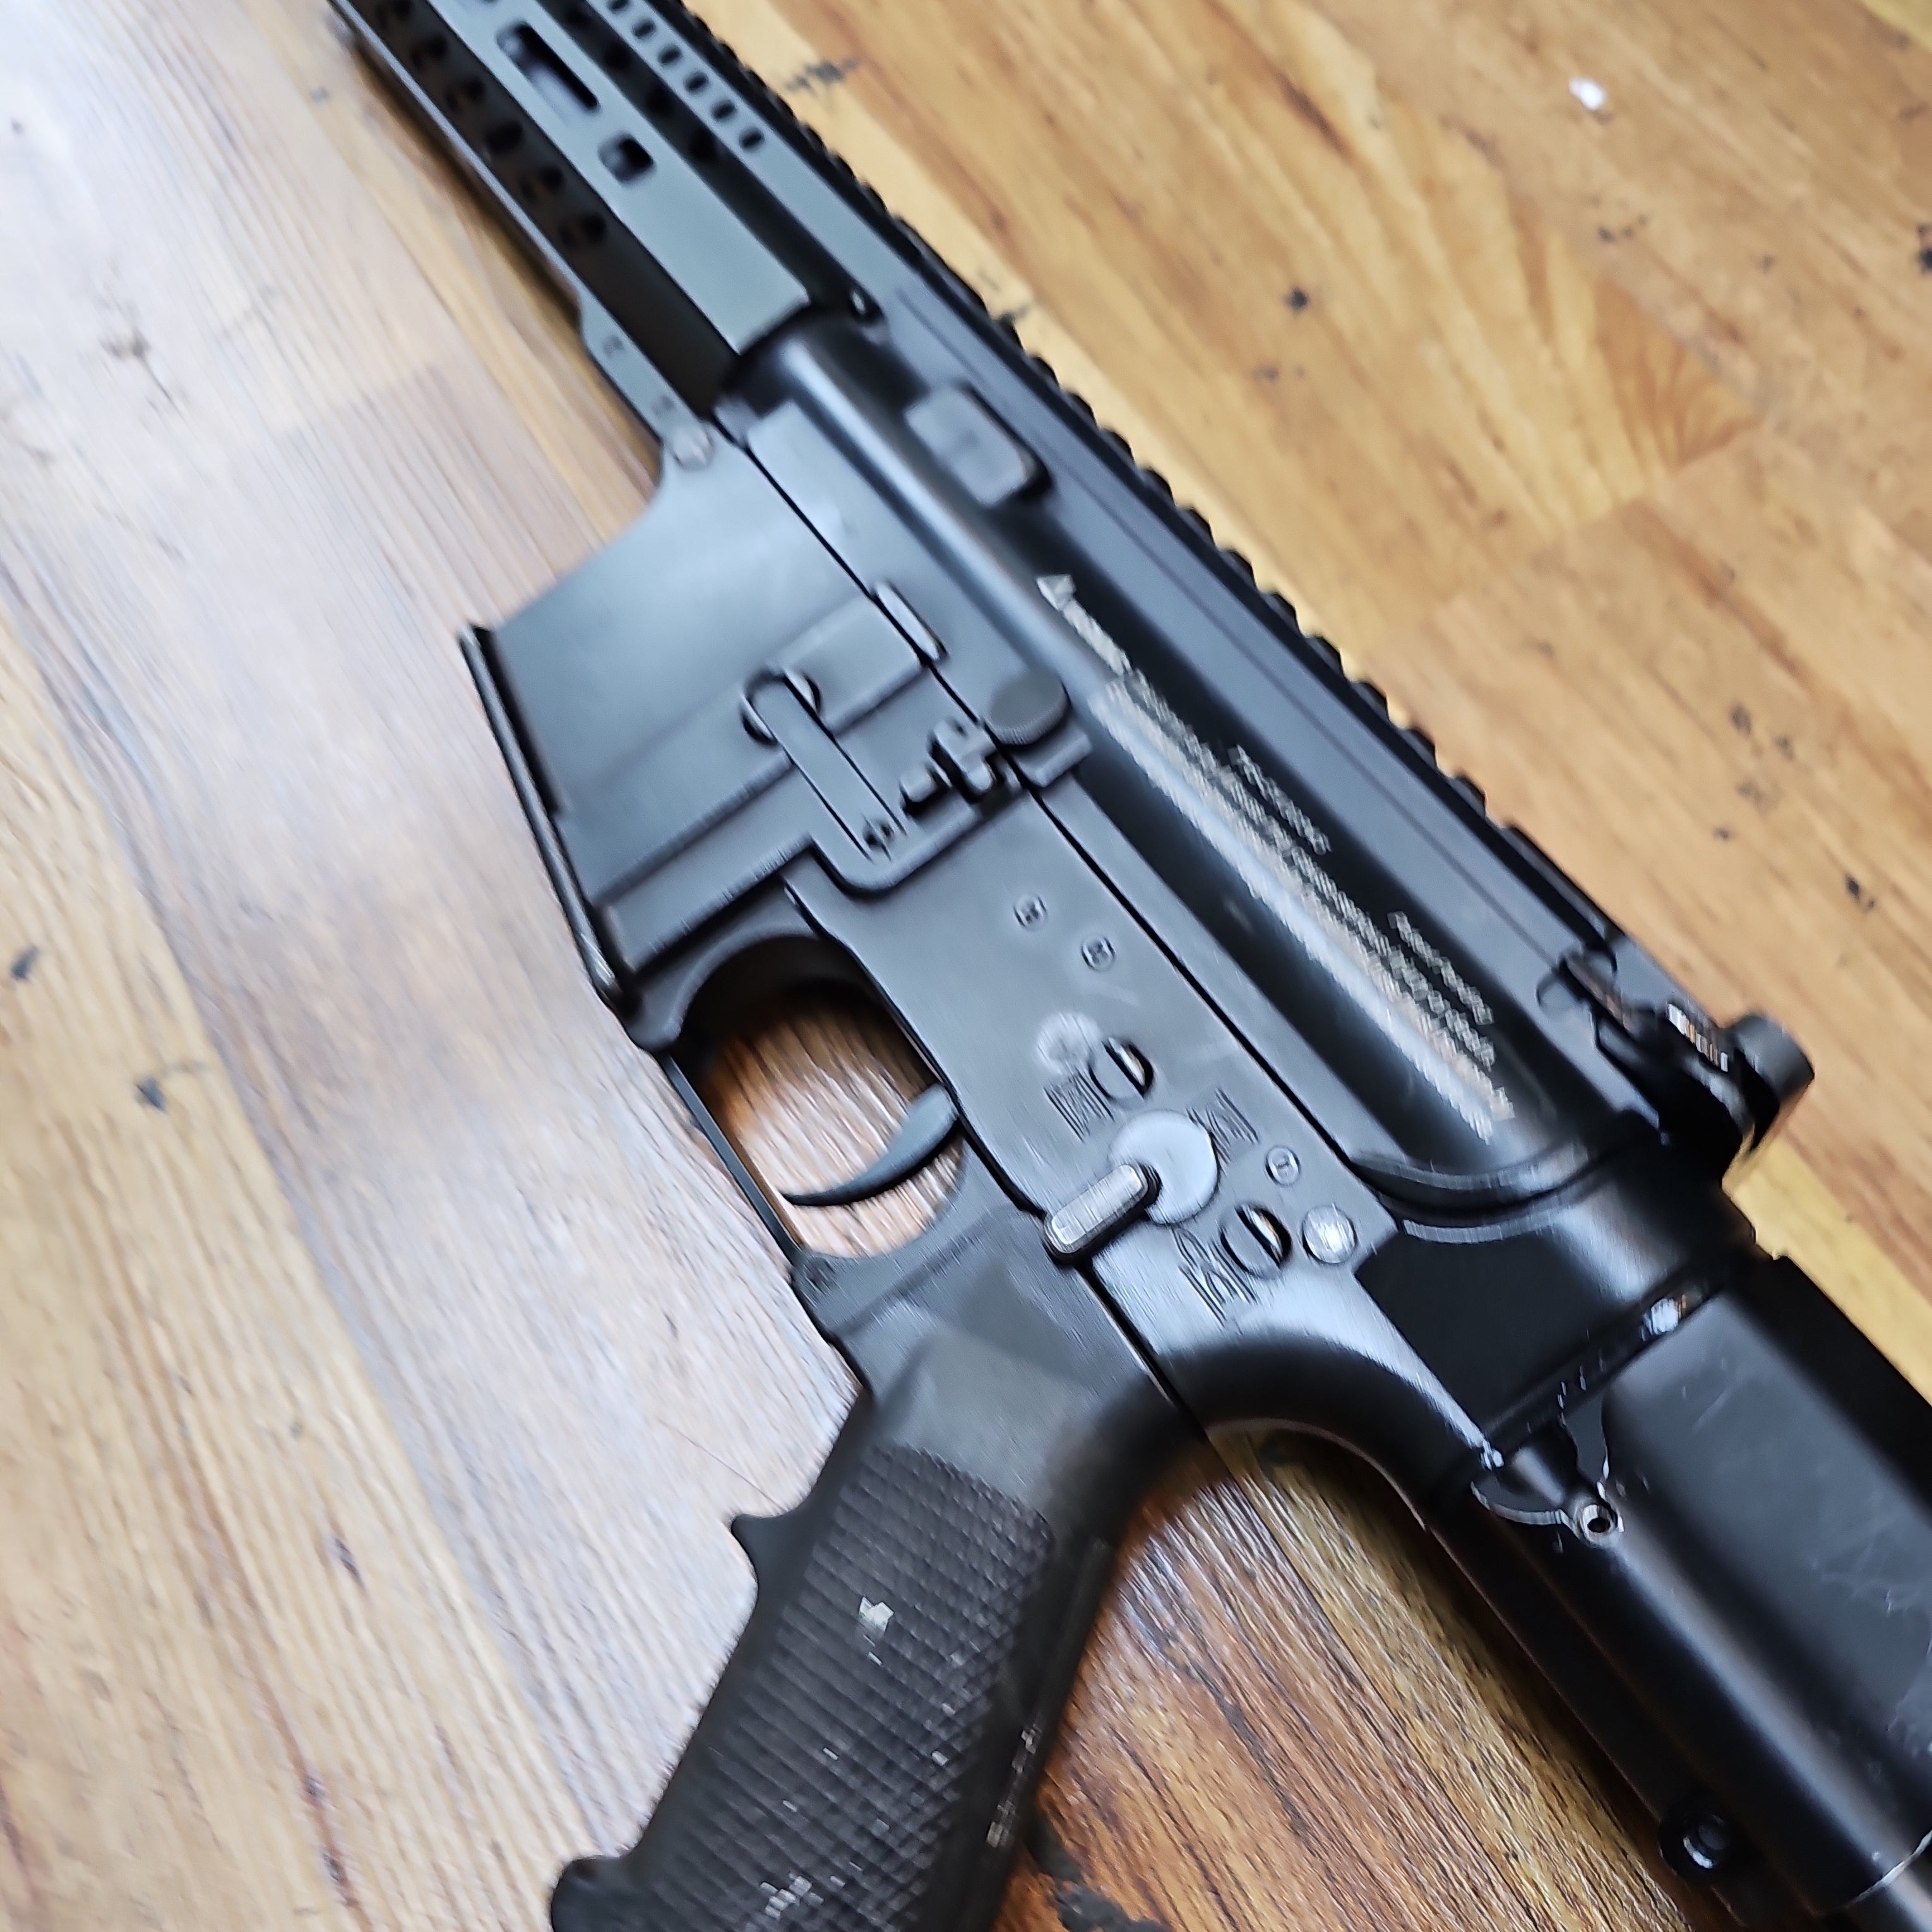 T15 PDW Semi Only - Eminent Paintball And Airsoft